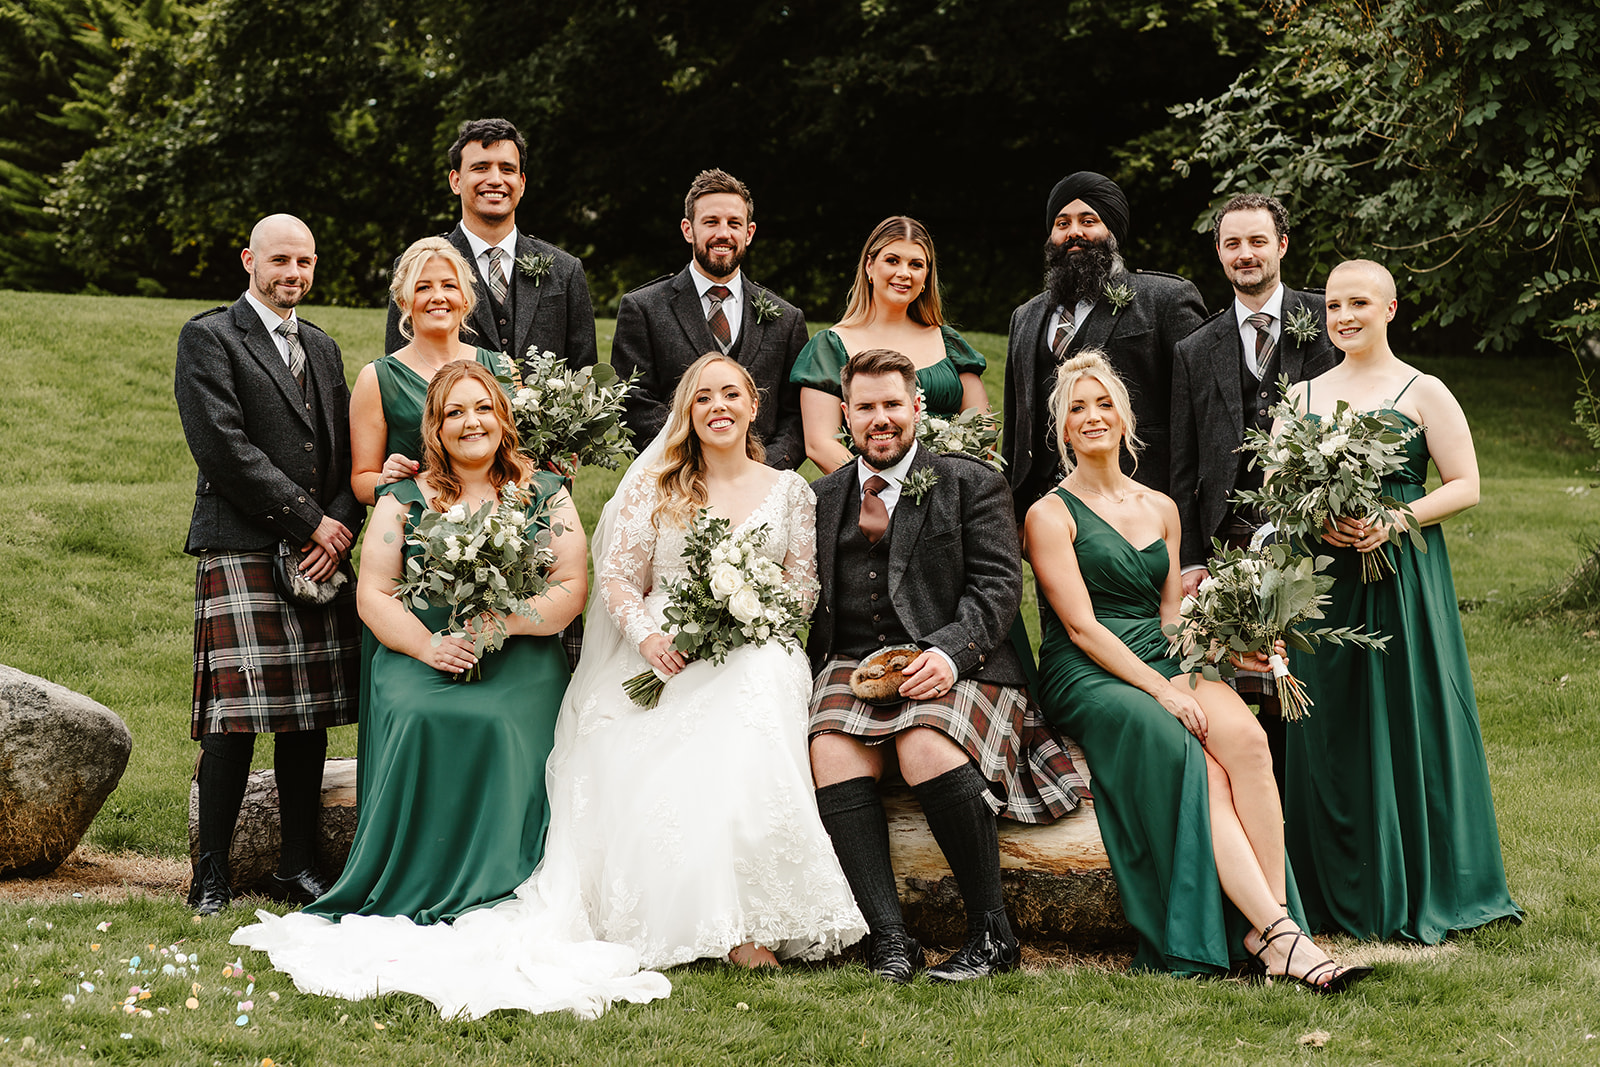 Bride and Groom sitting bridal party. Bridesmaids are wearing green dresses and groomsmen wearing kilts